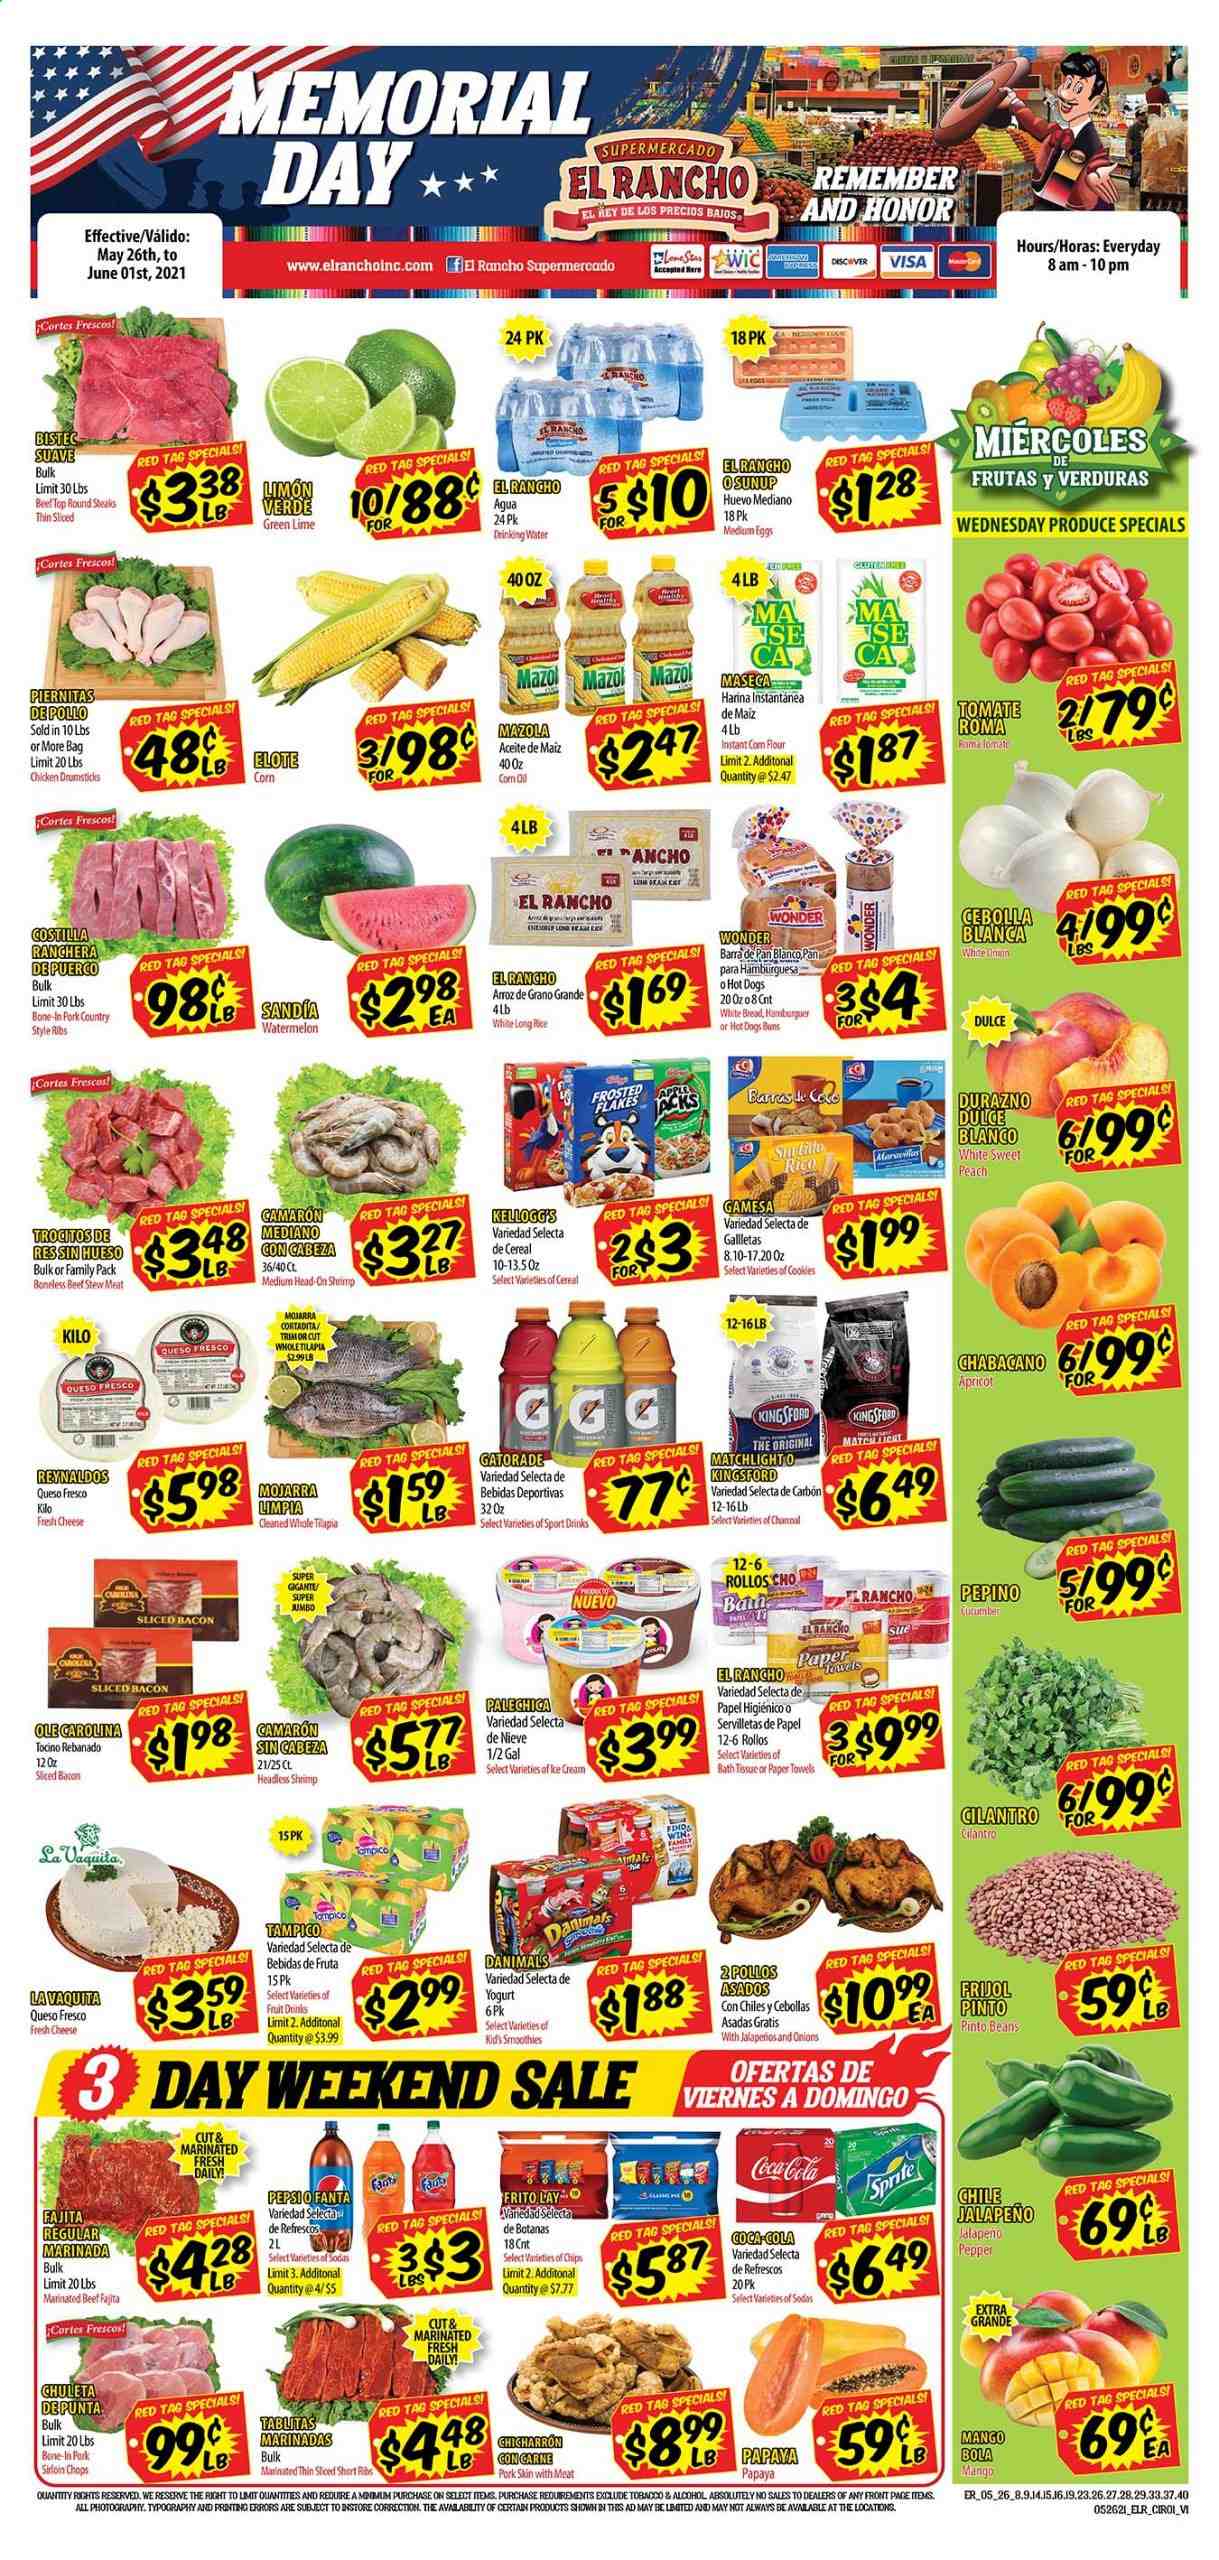 thumbnail - El Rancho Flyer - 05/26/2021 - 06/01/2021 - Sales products - stew meat, white bread, buns, beans, corn, jalapeño, mango, watermelon, papaya, tilapia, shrimps, hot dog, fajita, bacon, queso fresco, cheese, yoghurt, Danimals, eggs, cookies, Kellogg's, chips, flour, corn flour, pinto beans, cereals, Frosted Flakes, rice, cilantro, corn oil, Coca-Cola, Sprite, Fanta, Gatorade, fruit punch, smoothie, alcohol, chicken drumsticks, steak, marinated beef, pork ribs, country style ribs. Page 1.